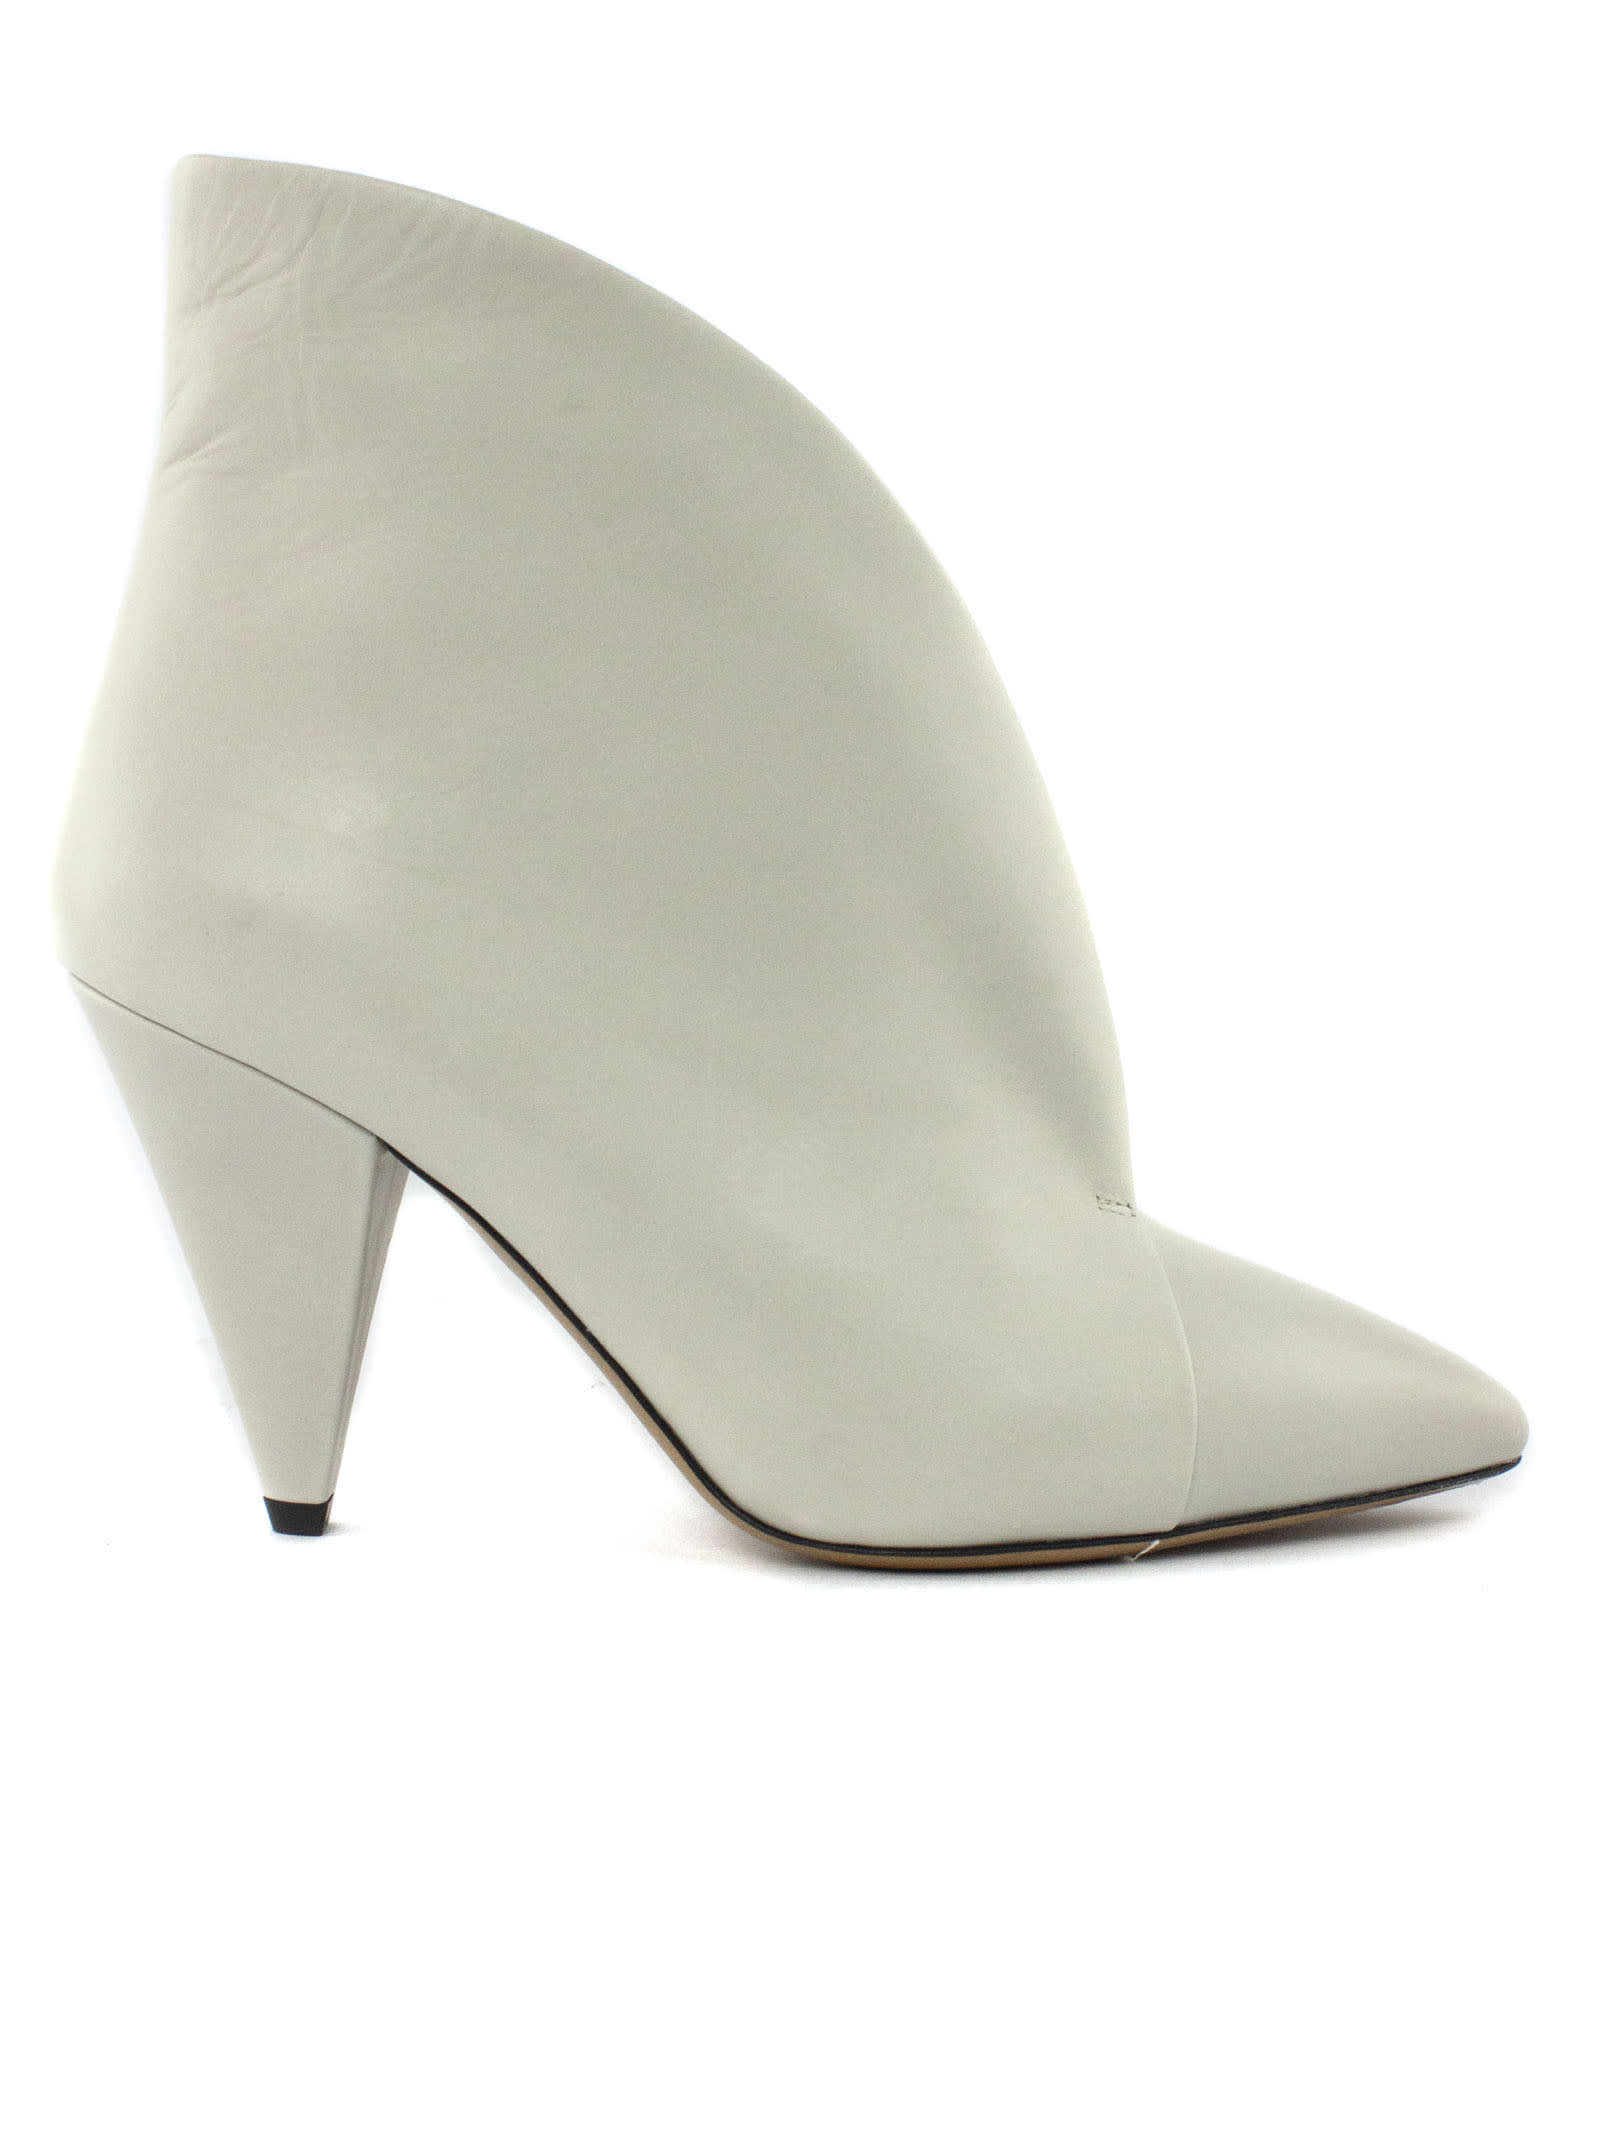 Buy Isabel Marant White Calf Leather Boots online, shop Isabel Marant shoes with free shipping